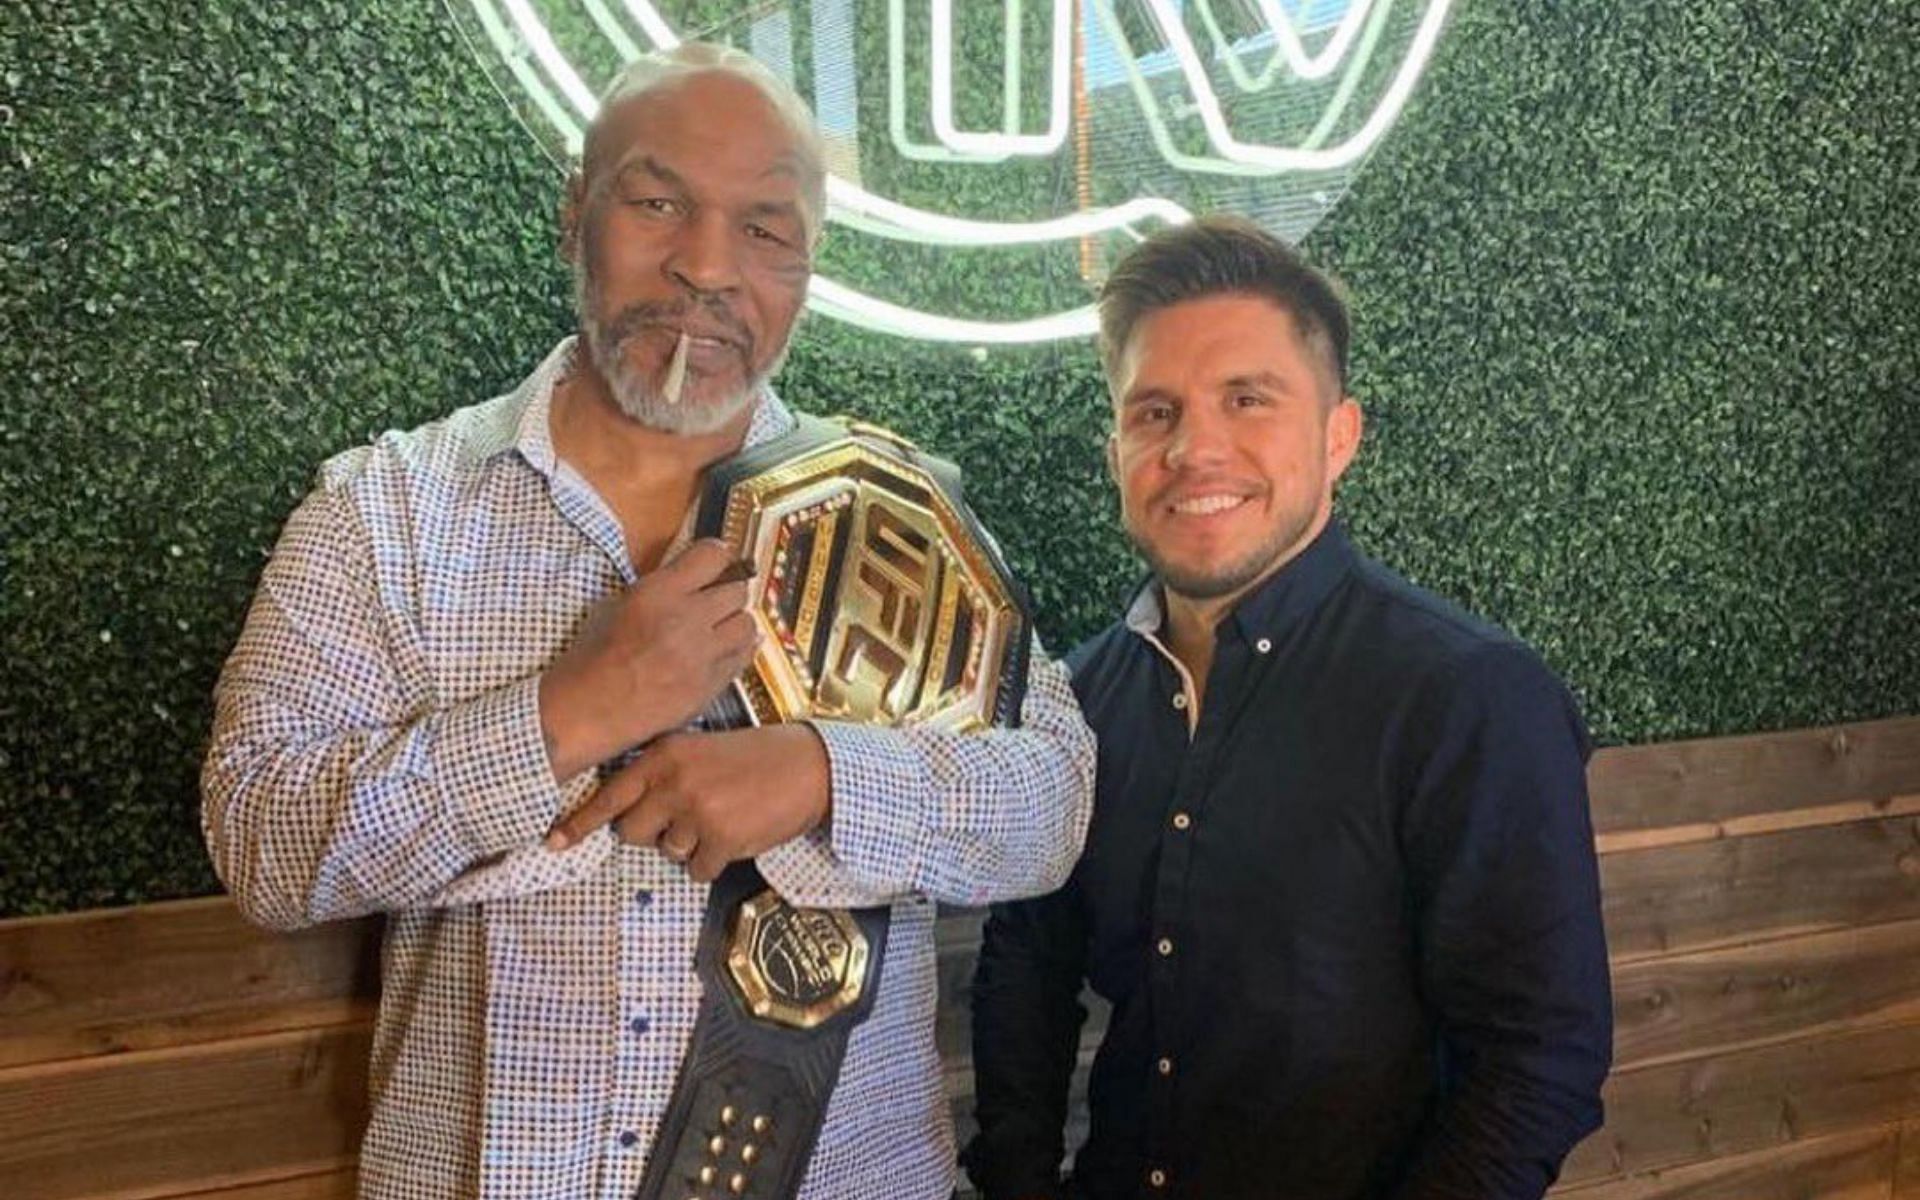 Mike Tyson (left) with Henry Cejudo [Image Courtesy: @MikeTyson on Twitter]